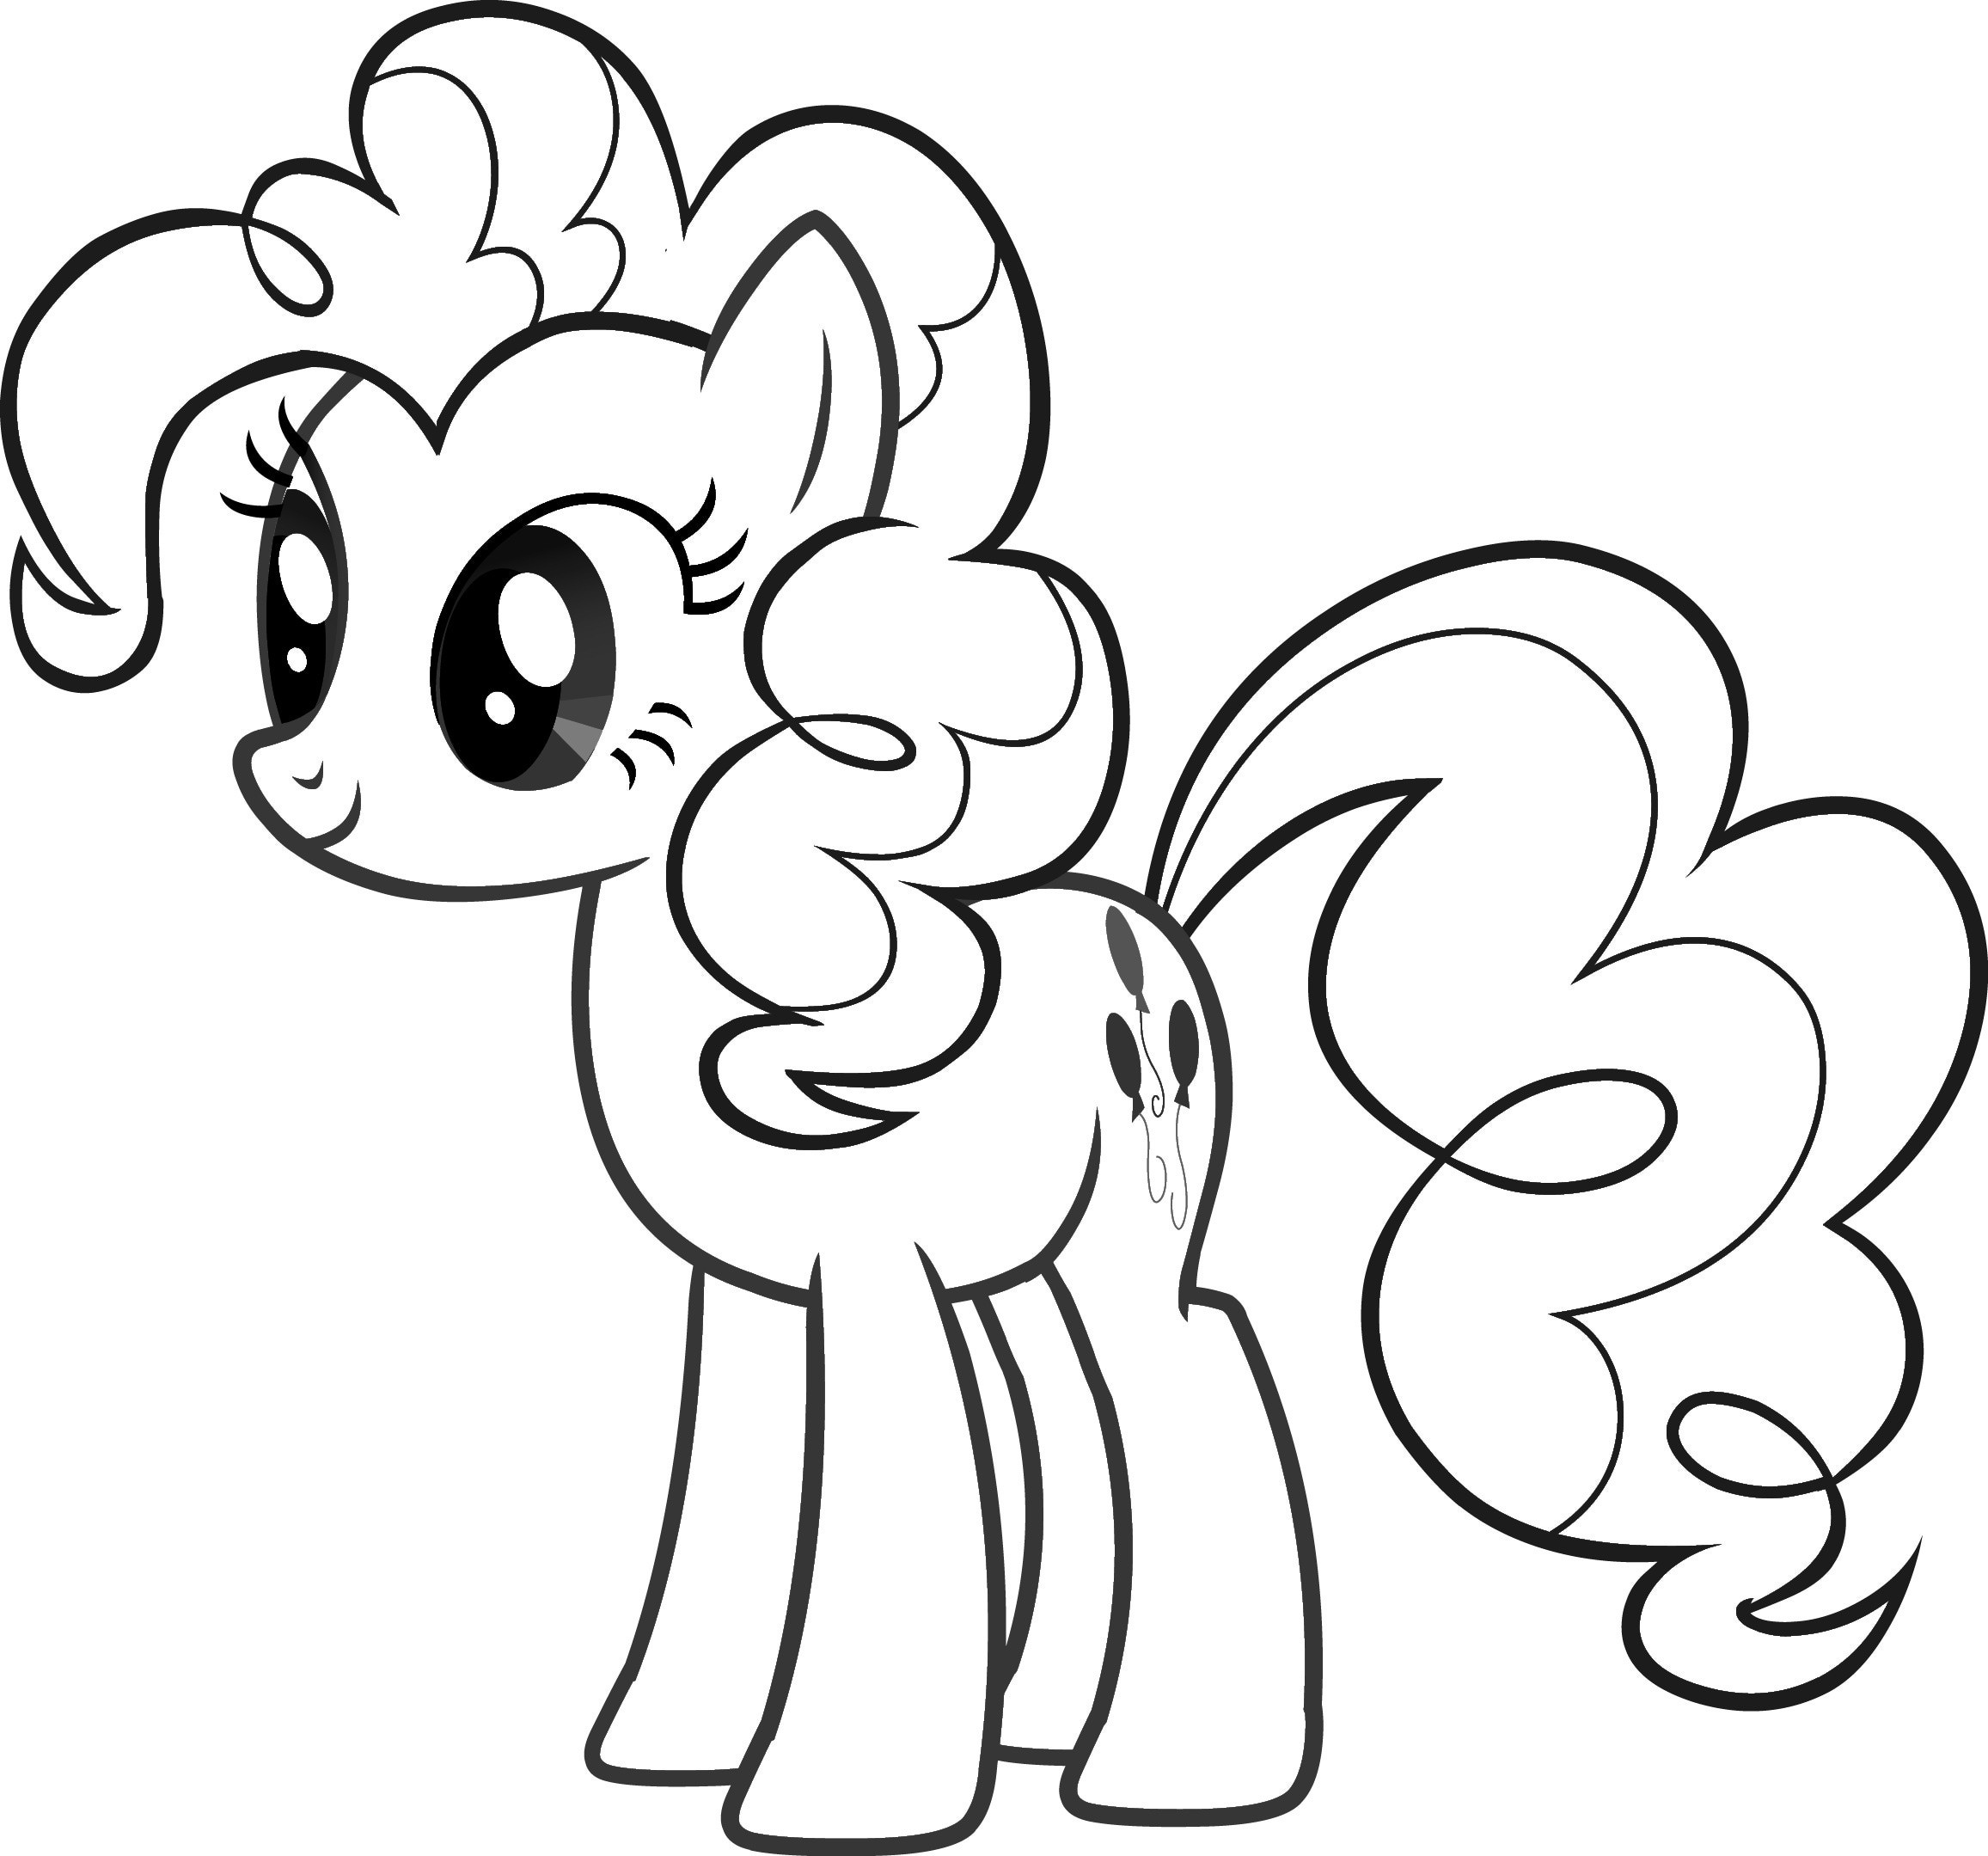 Free Printable Coloring Pages For Girls
 My little pony coloring pages